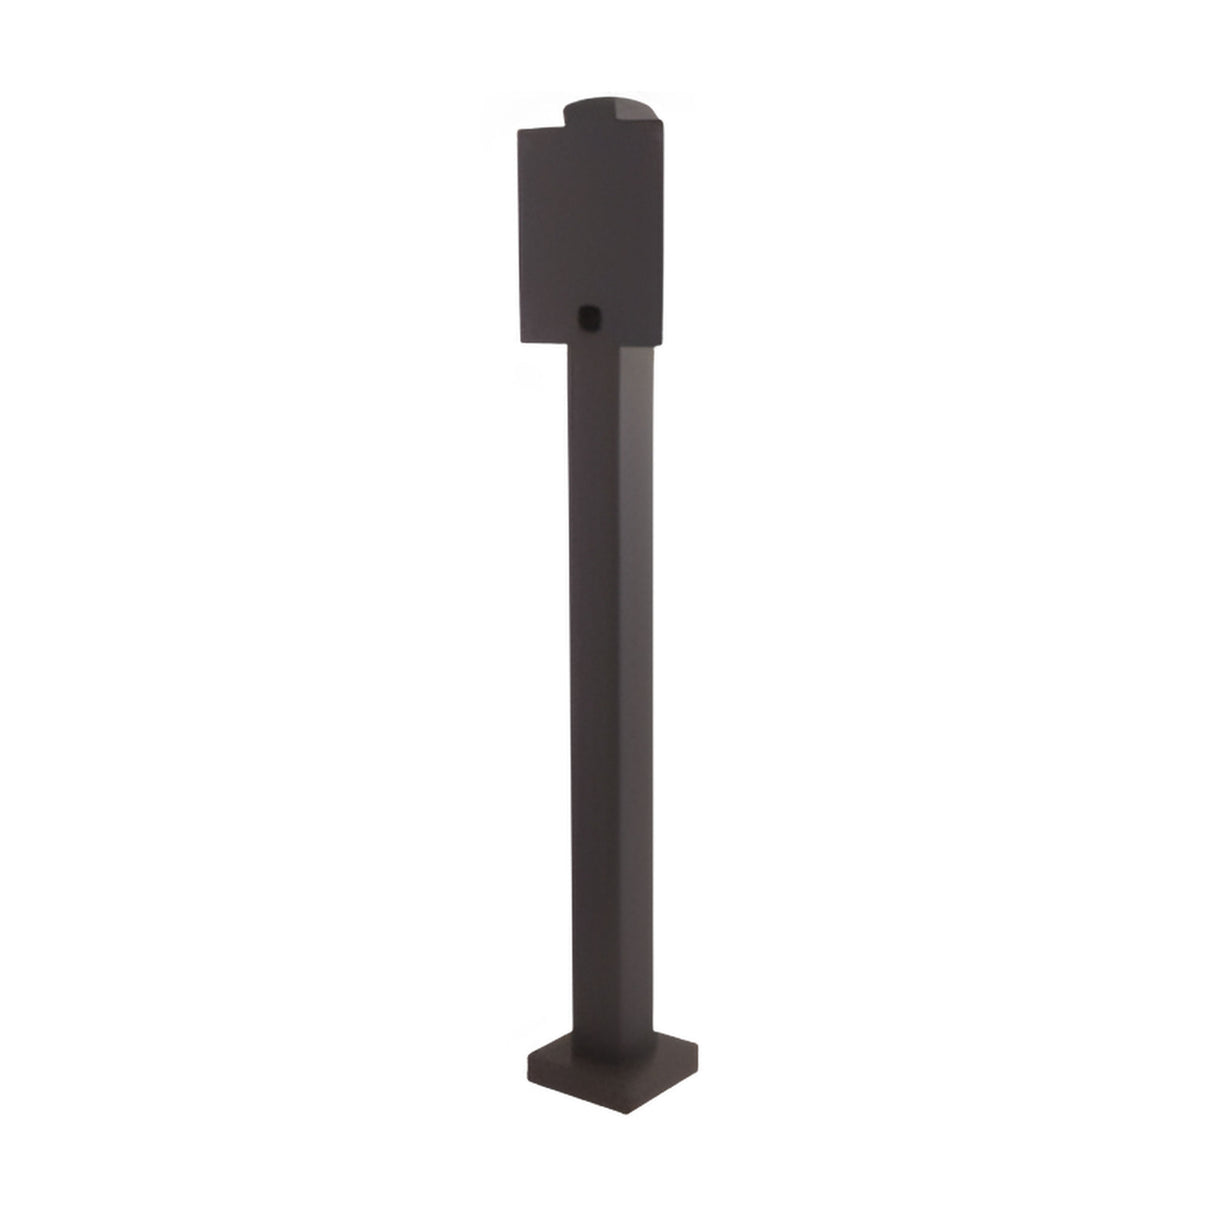 Doorking 1200-050 Mounting Post Heavy-Duty Architectural Style Straight